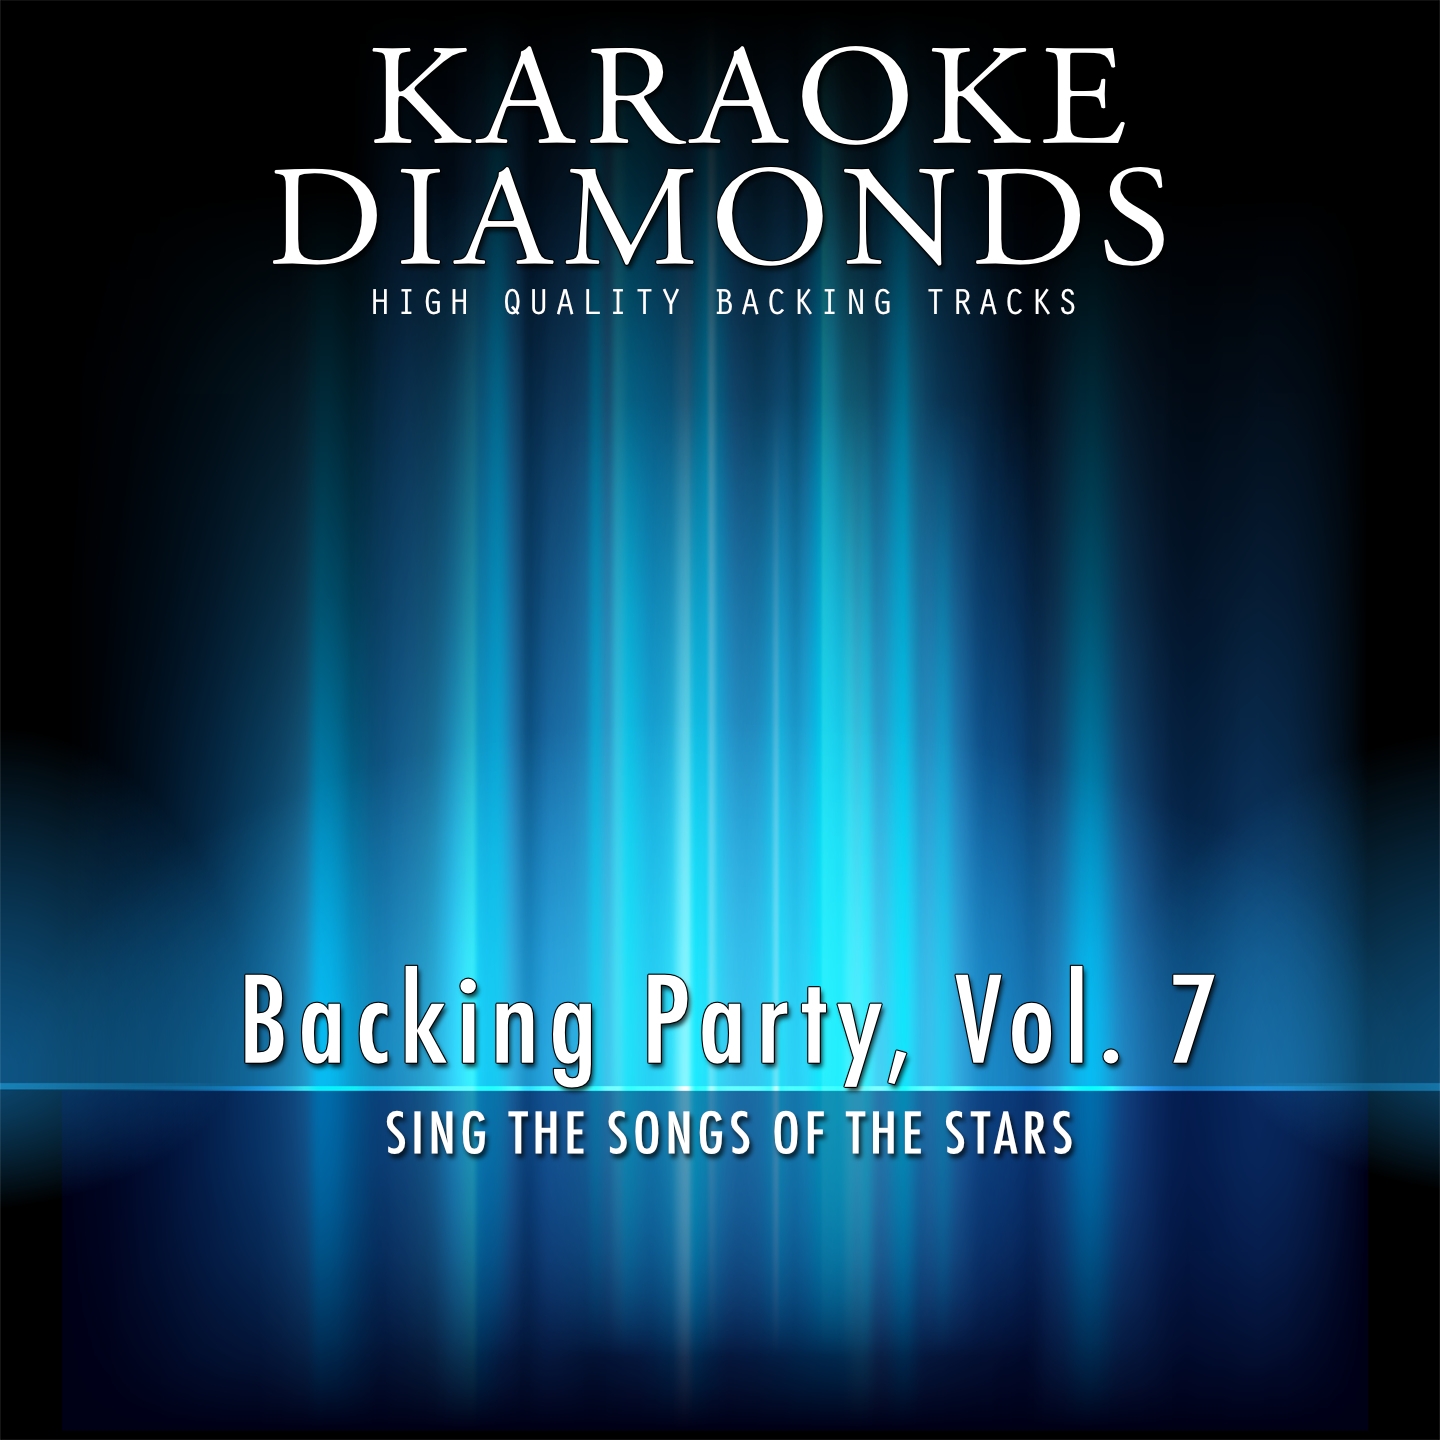 Backing Party, Vol. 7